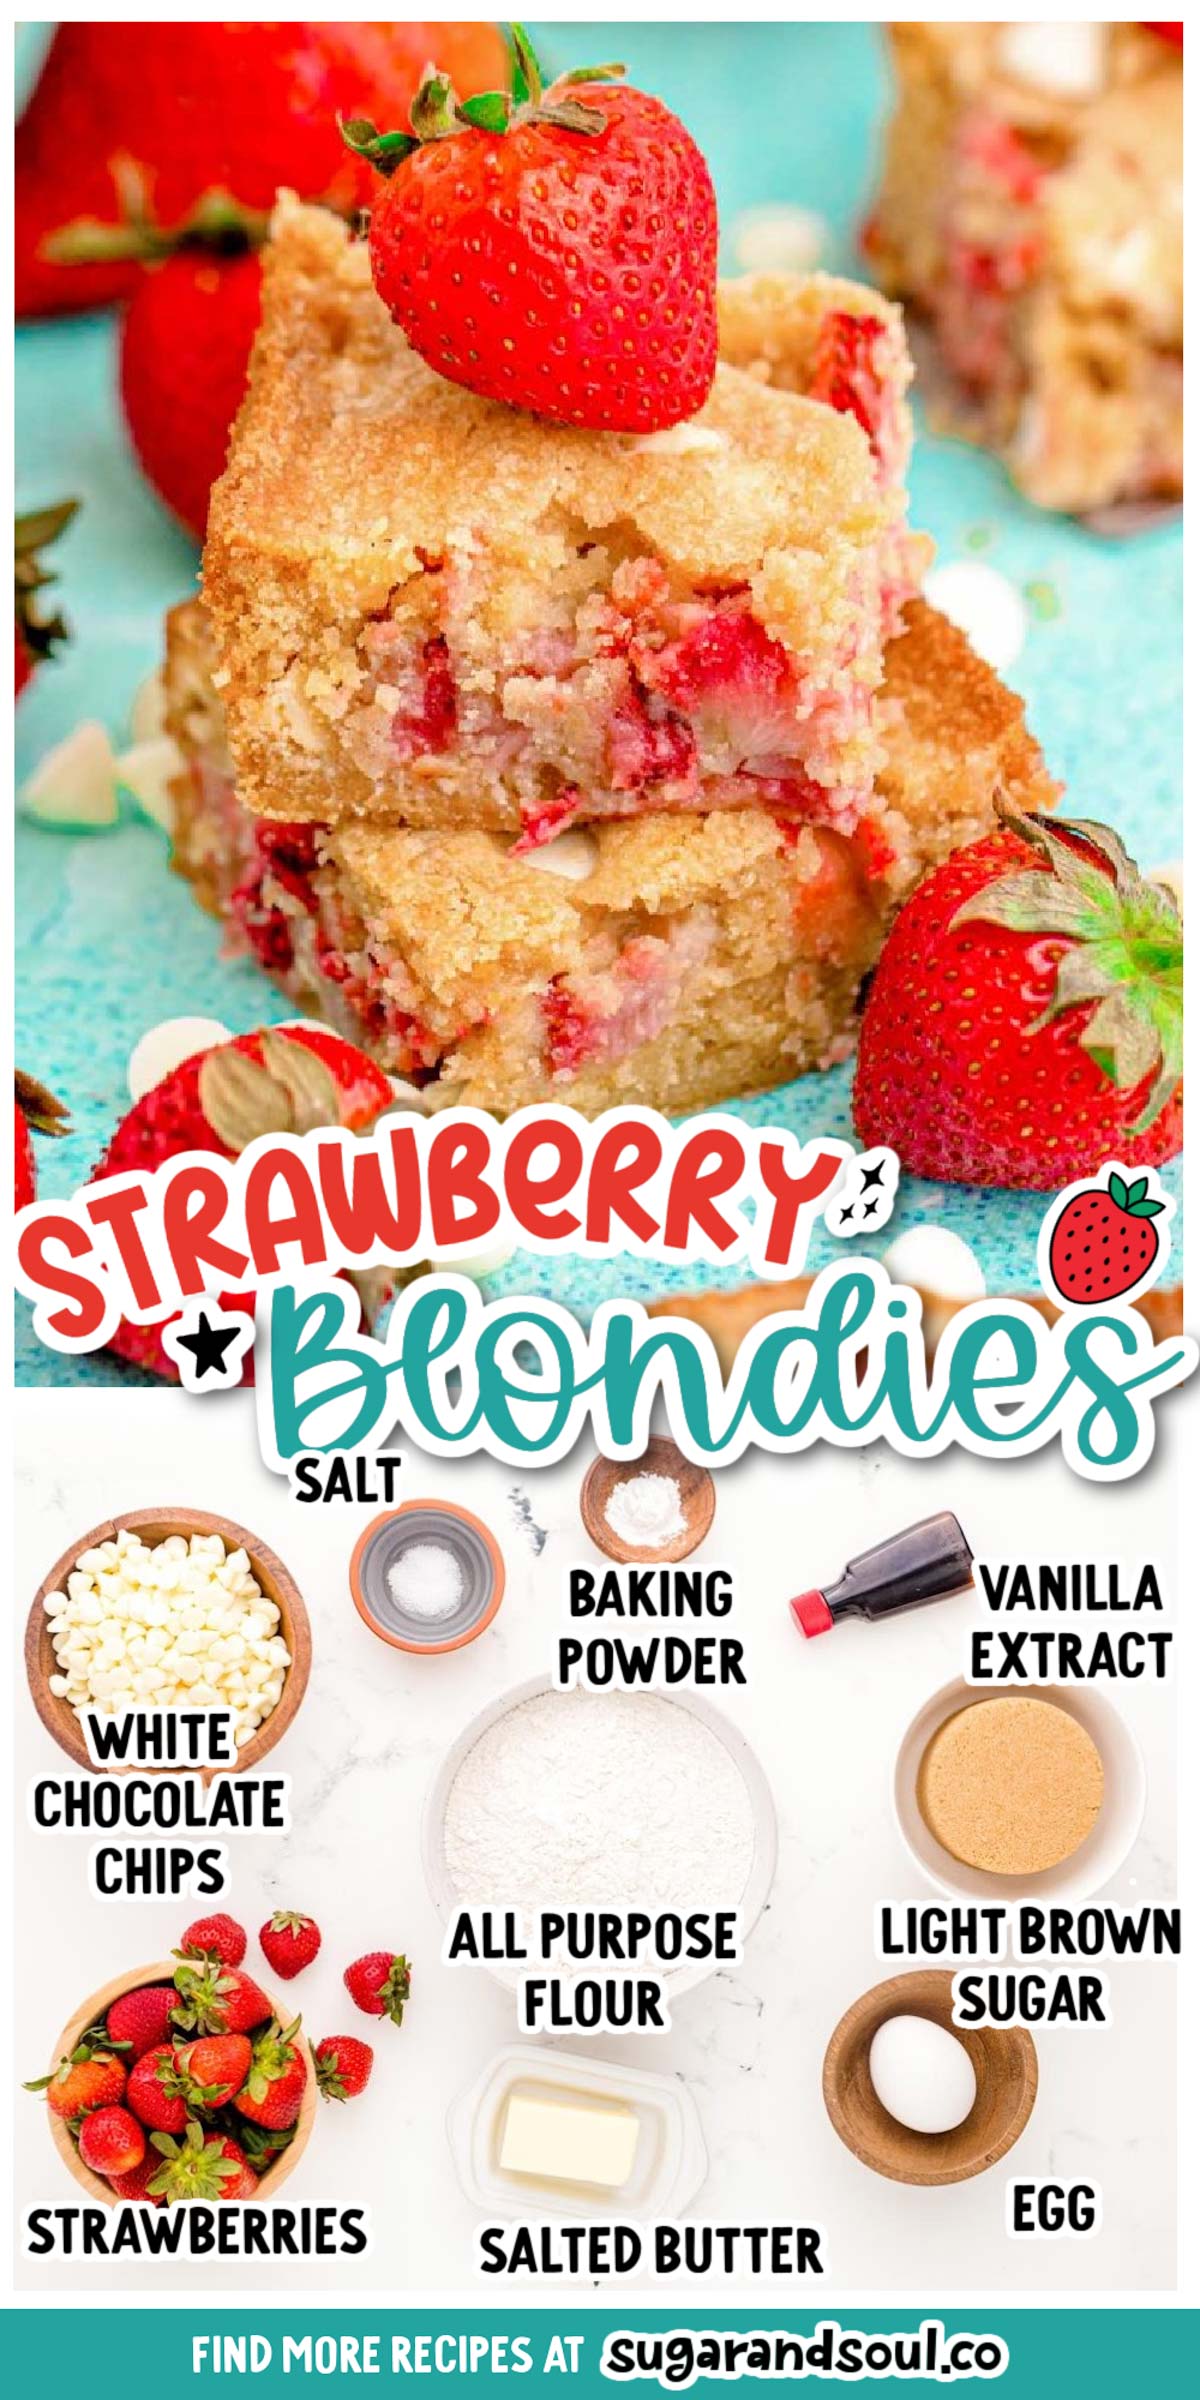 Strawberry Blondies are made with pantry staple ingredients and fresh, juicy strawberries, making them the perfect summertime dessert! An easy-to-make treat that bakes in just 25 minutes! via @sugarandsoulco